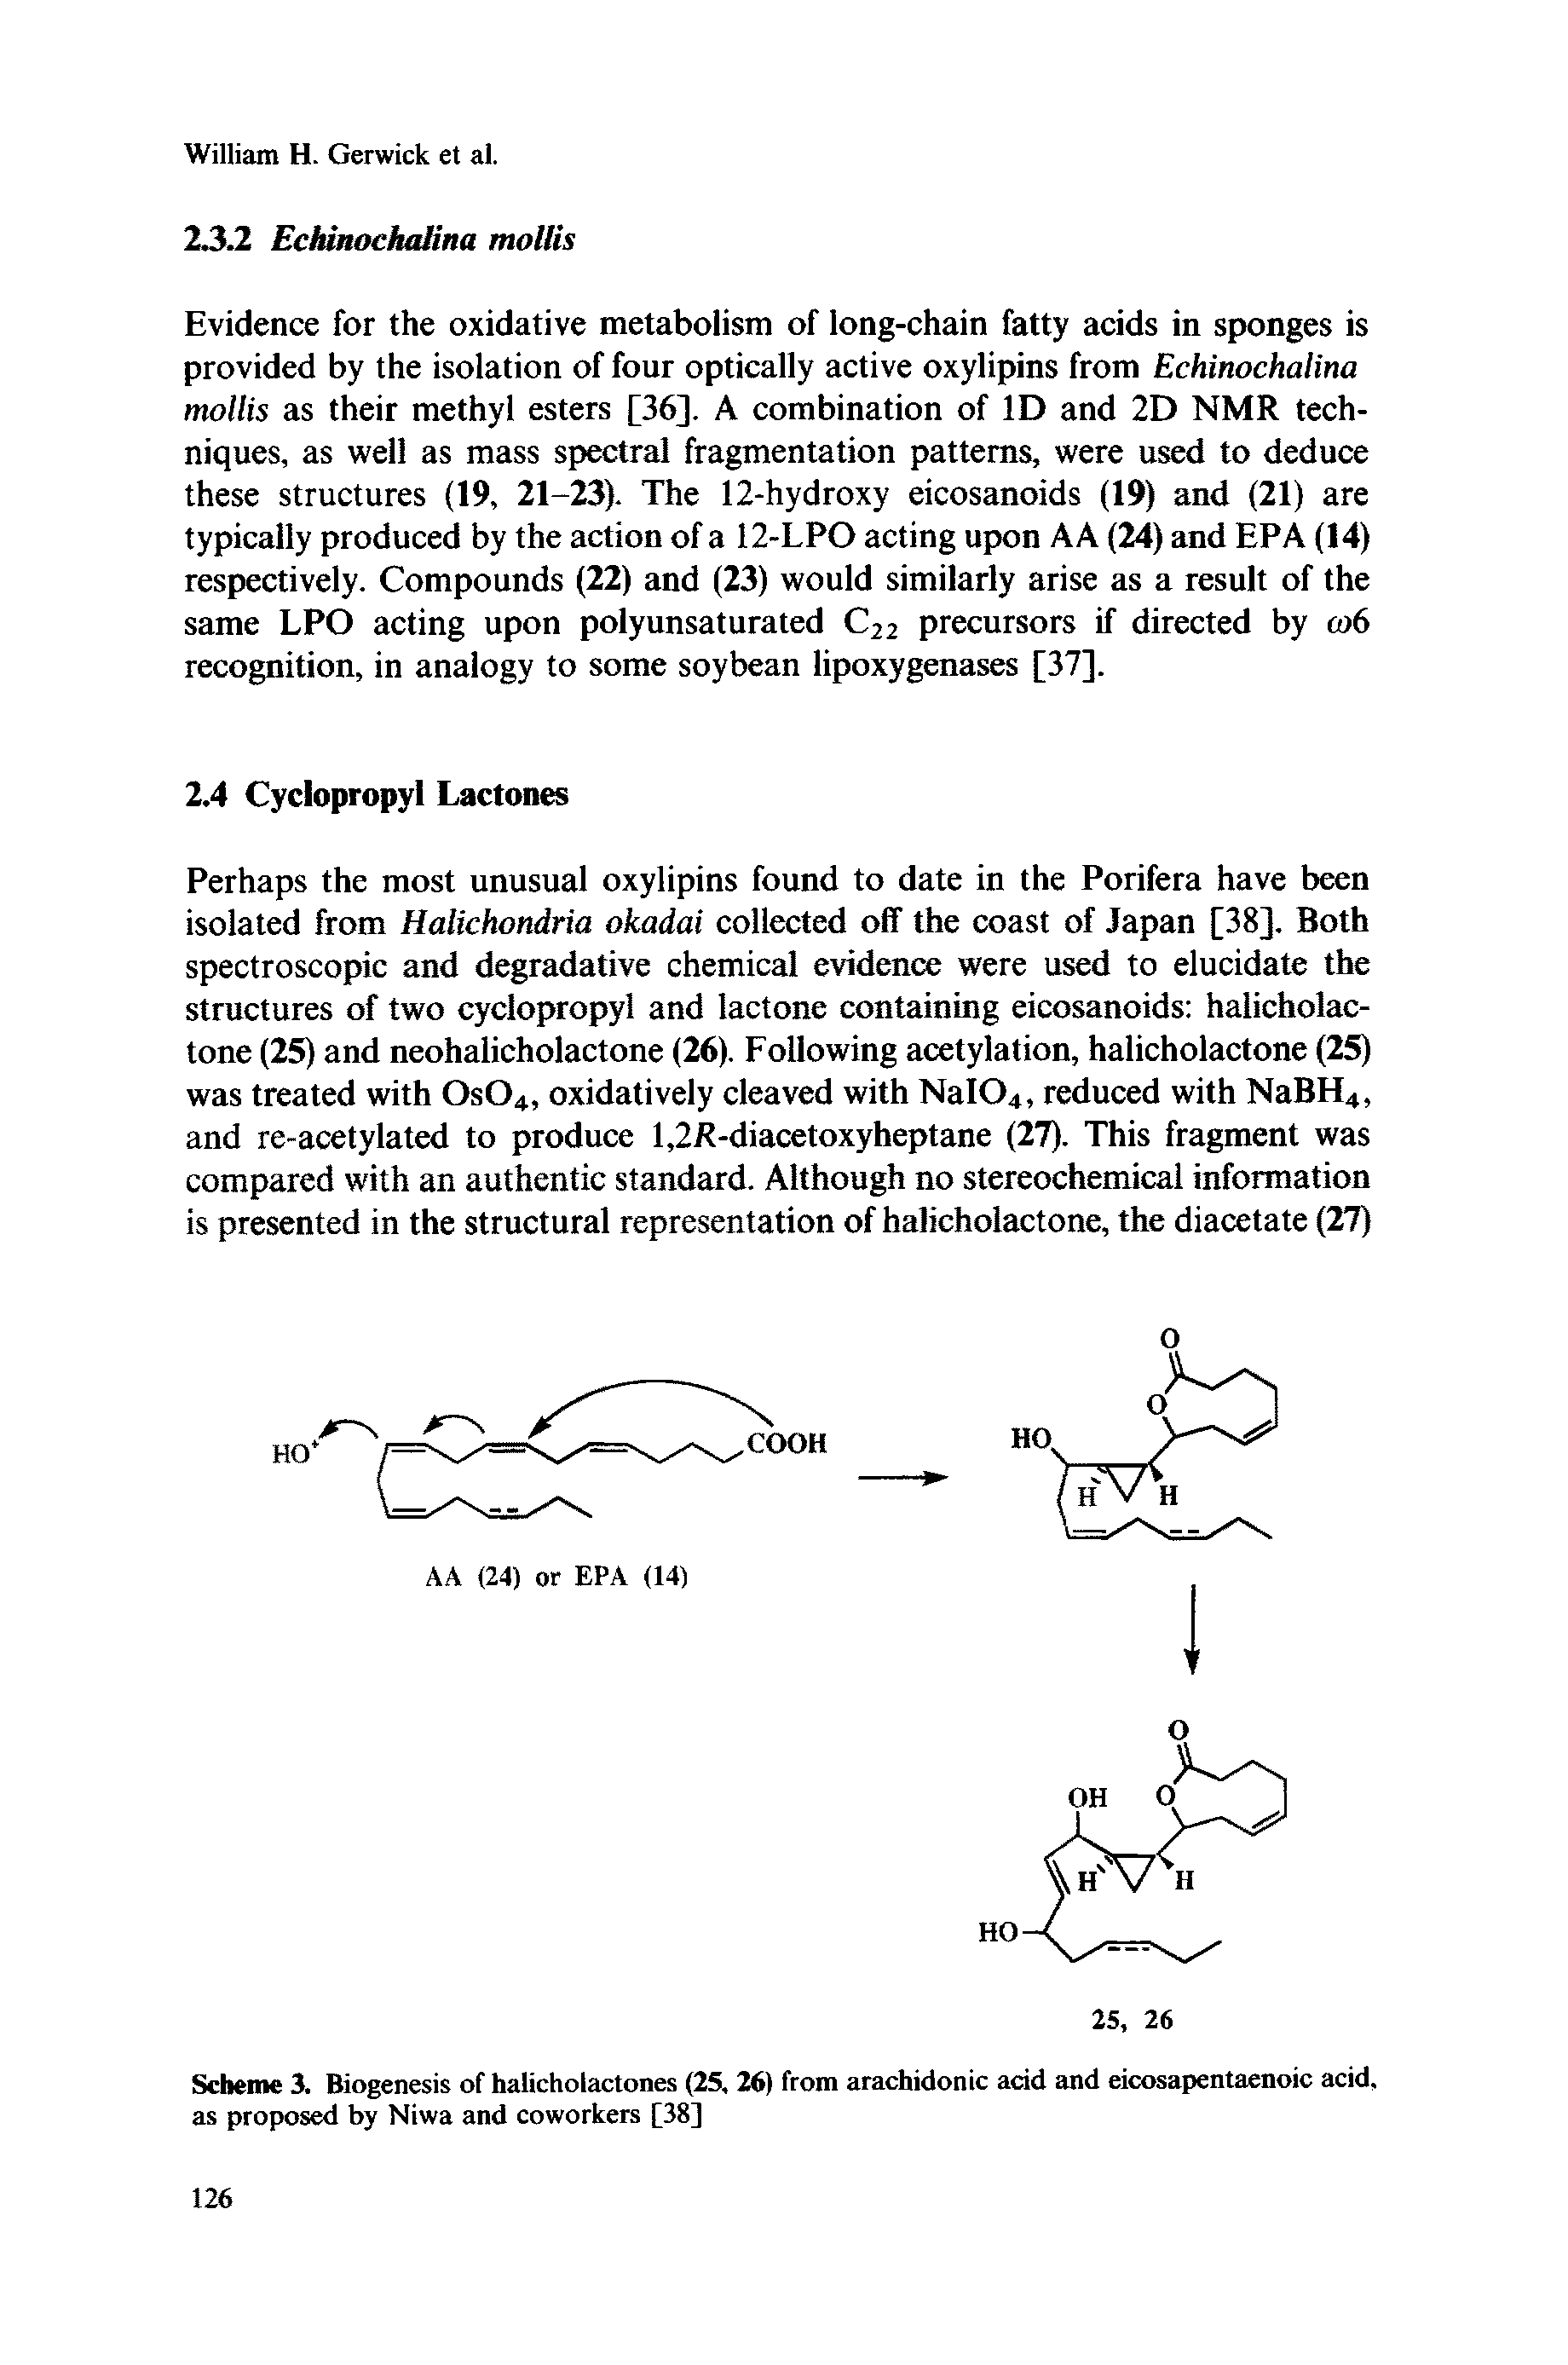 Scheme 3. Biogenesis of halicholactones (25, 26) from arachidonic acid and eicosapentaenoic acid, as proposed by Niwa and coworkers [38]...